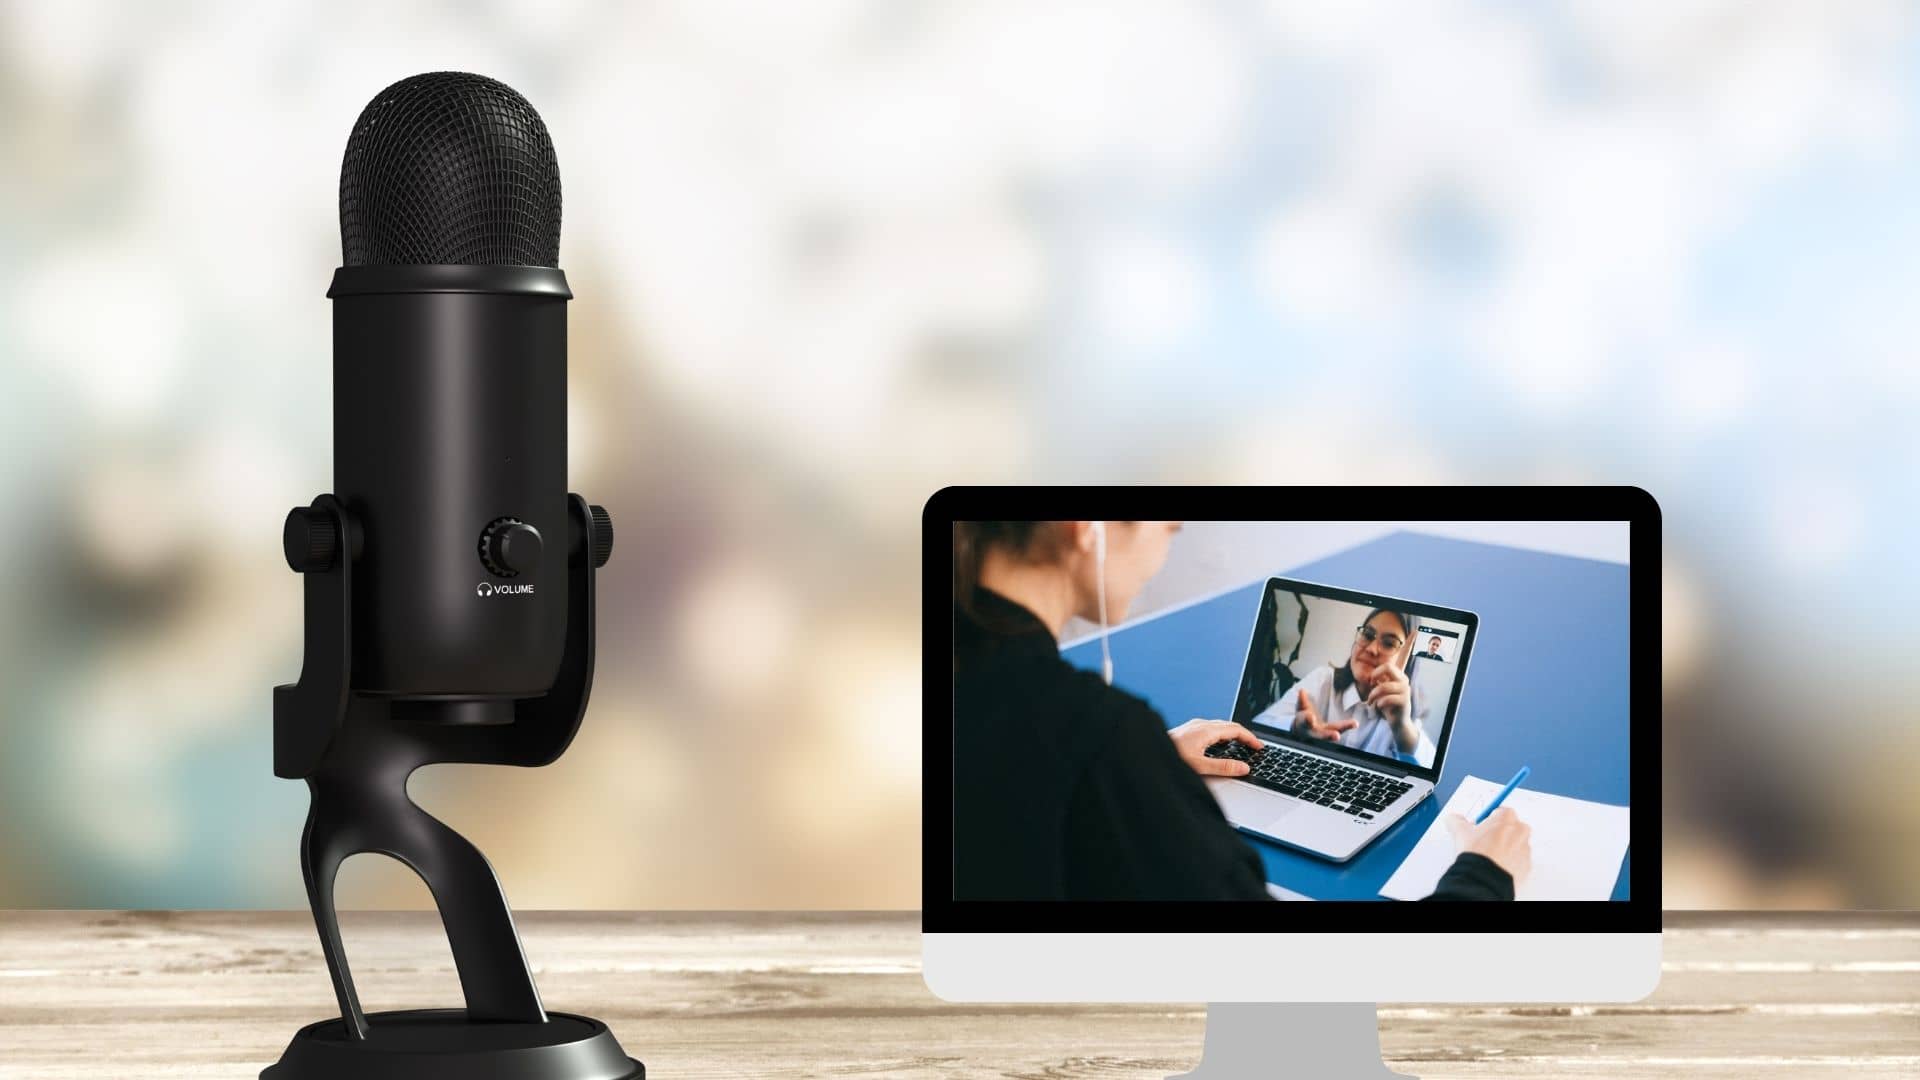 How To Record A Podcast On Skype?